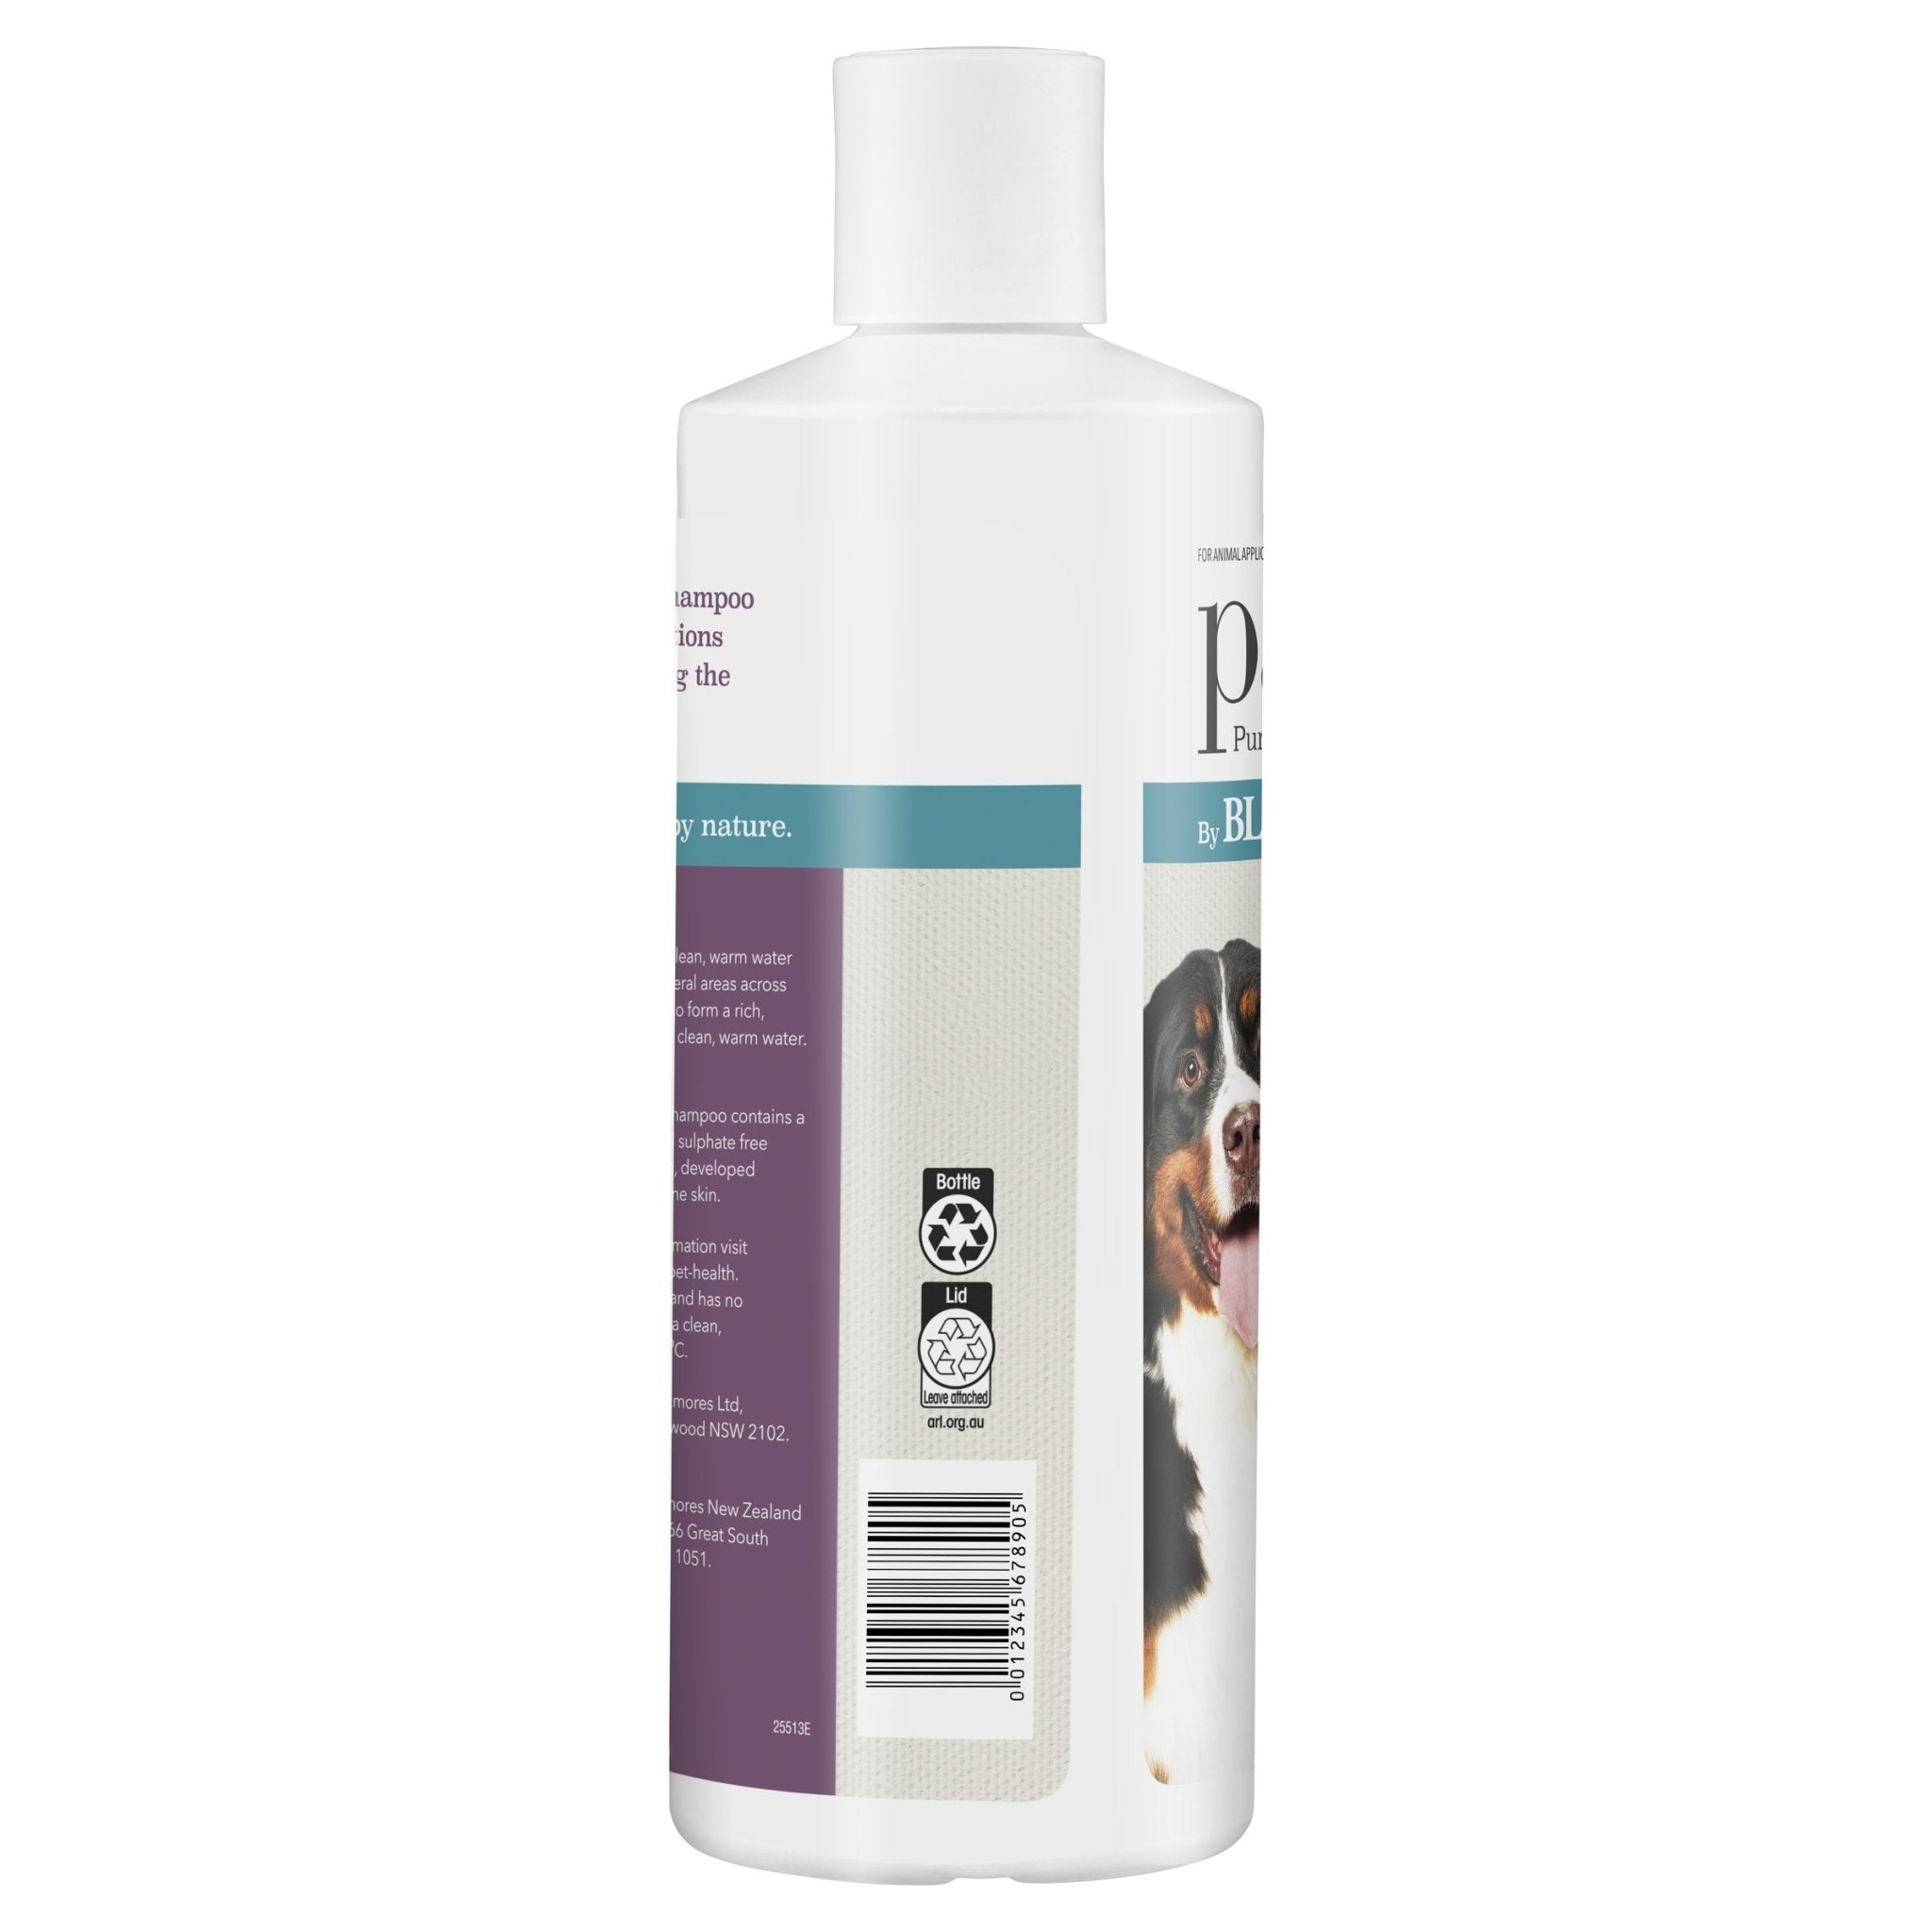 PAW 2 In 1 Conditioning Shampoo 500ml